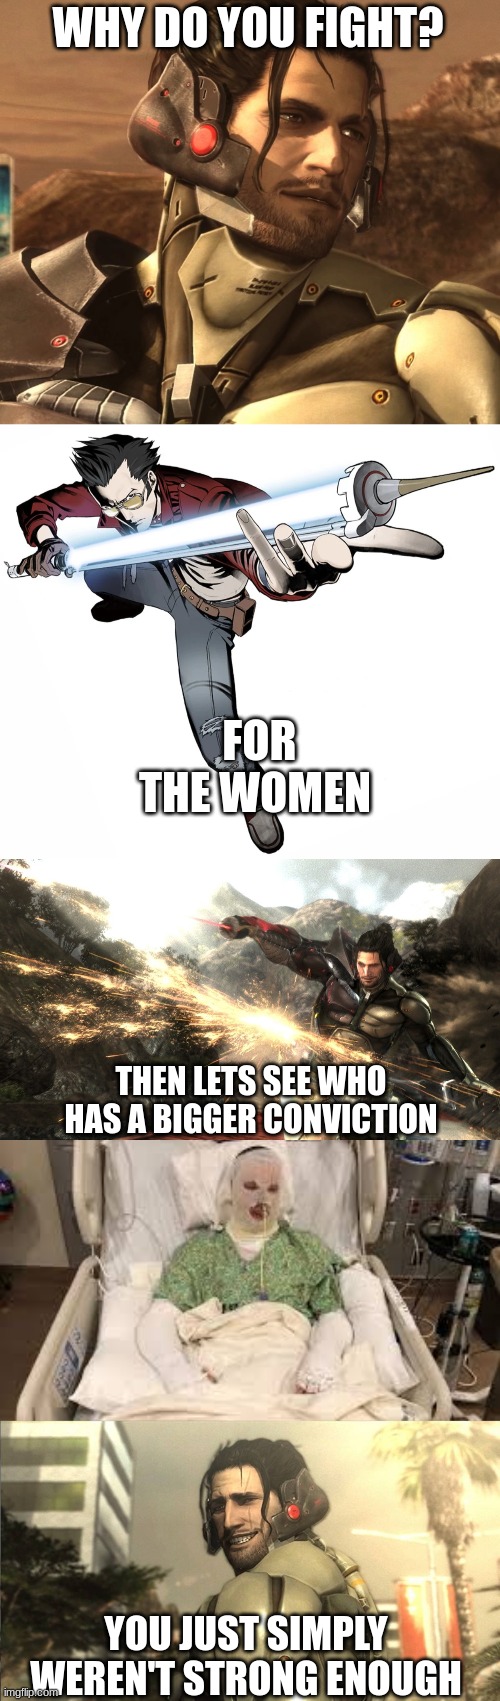 Should Have Stopped Simping | WHY DO YOU FIGHT? FOR THE WOMEN; THEN LETS SEE WHO HAS A BIGGER CONVICTION; YOU JUST SIMPLY WEREN'T STRONG ENOUGH | image tagged in jet stream sam,metal gear solid,sword,memes,simp,bandages | made w/ Imgflip meme maker